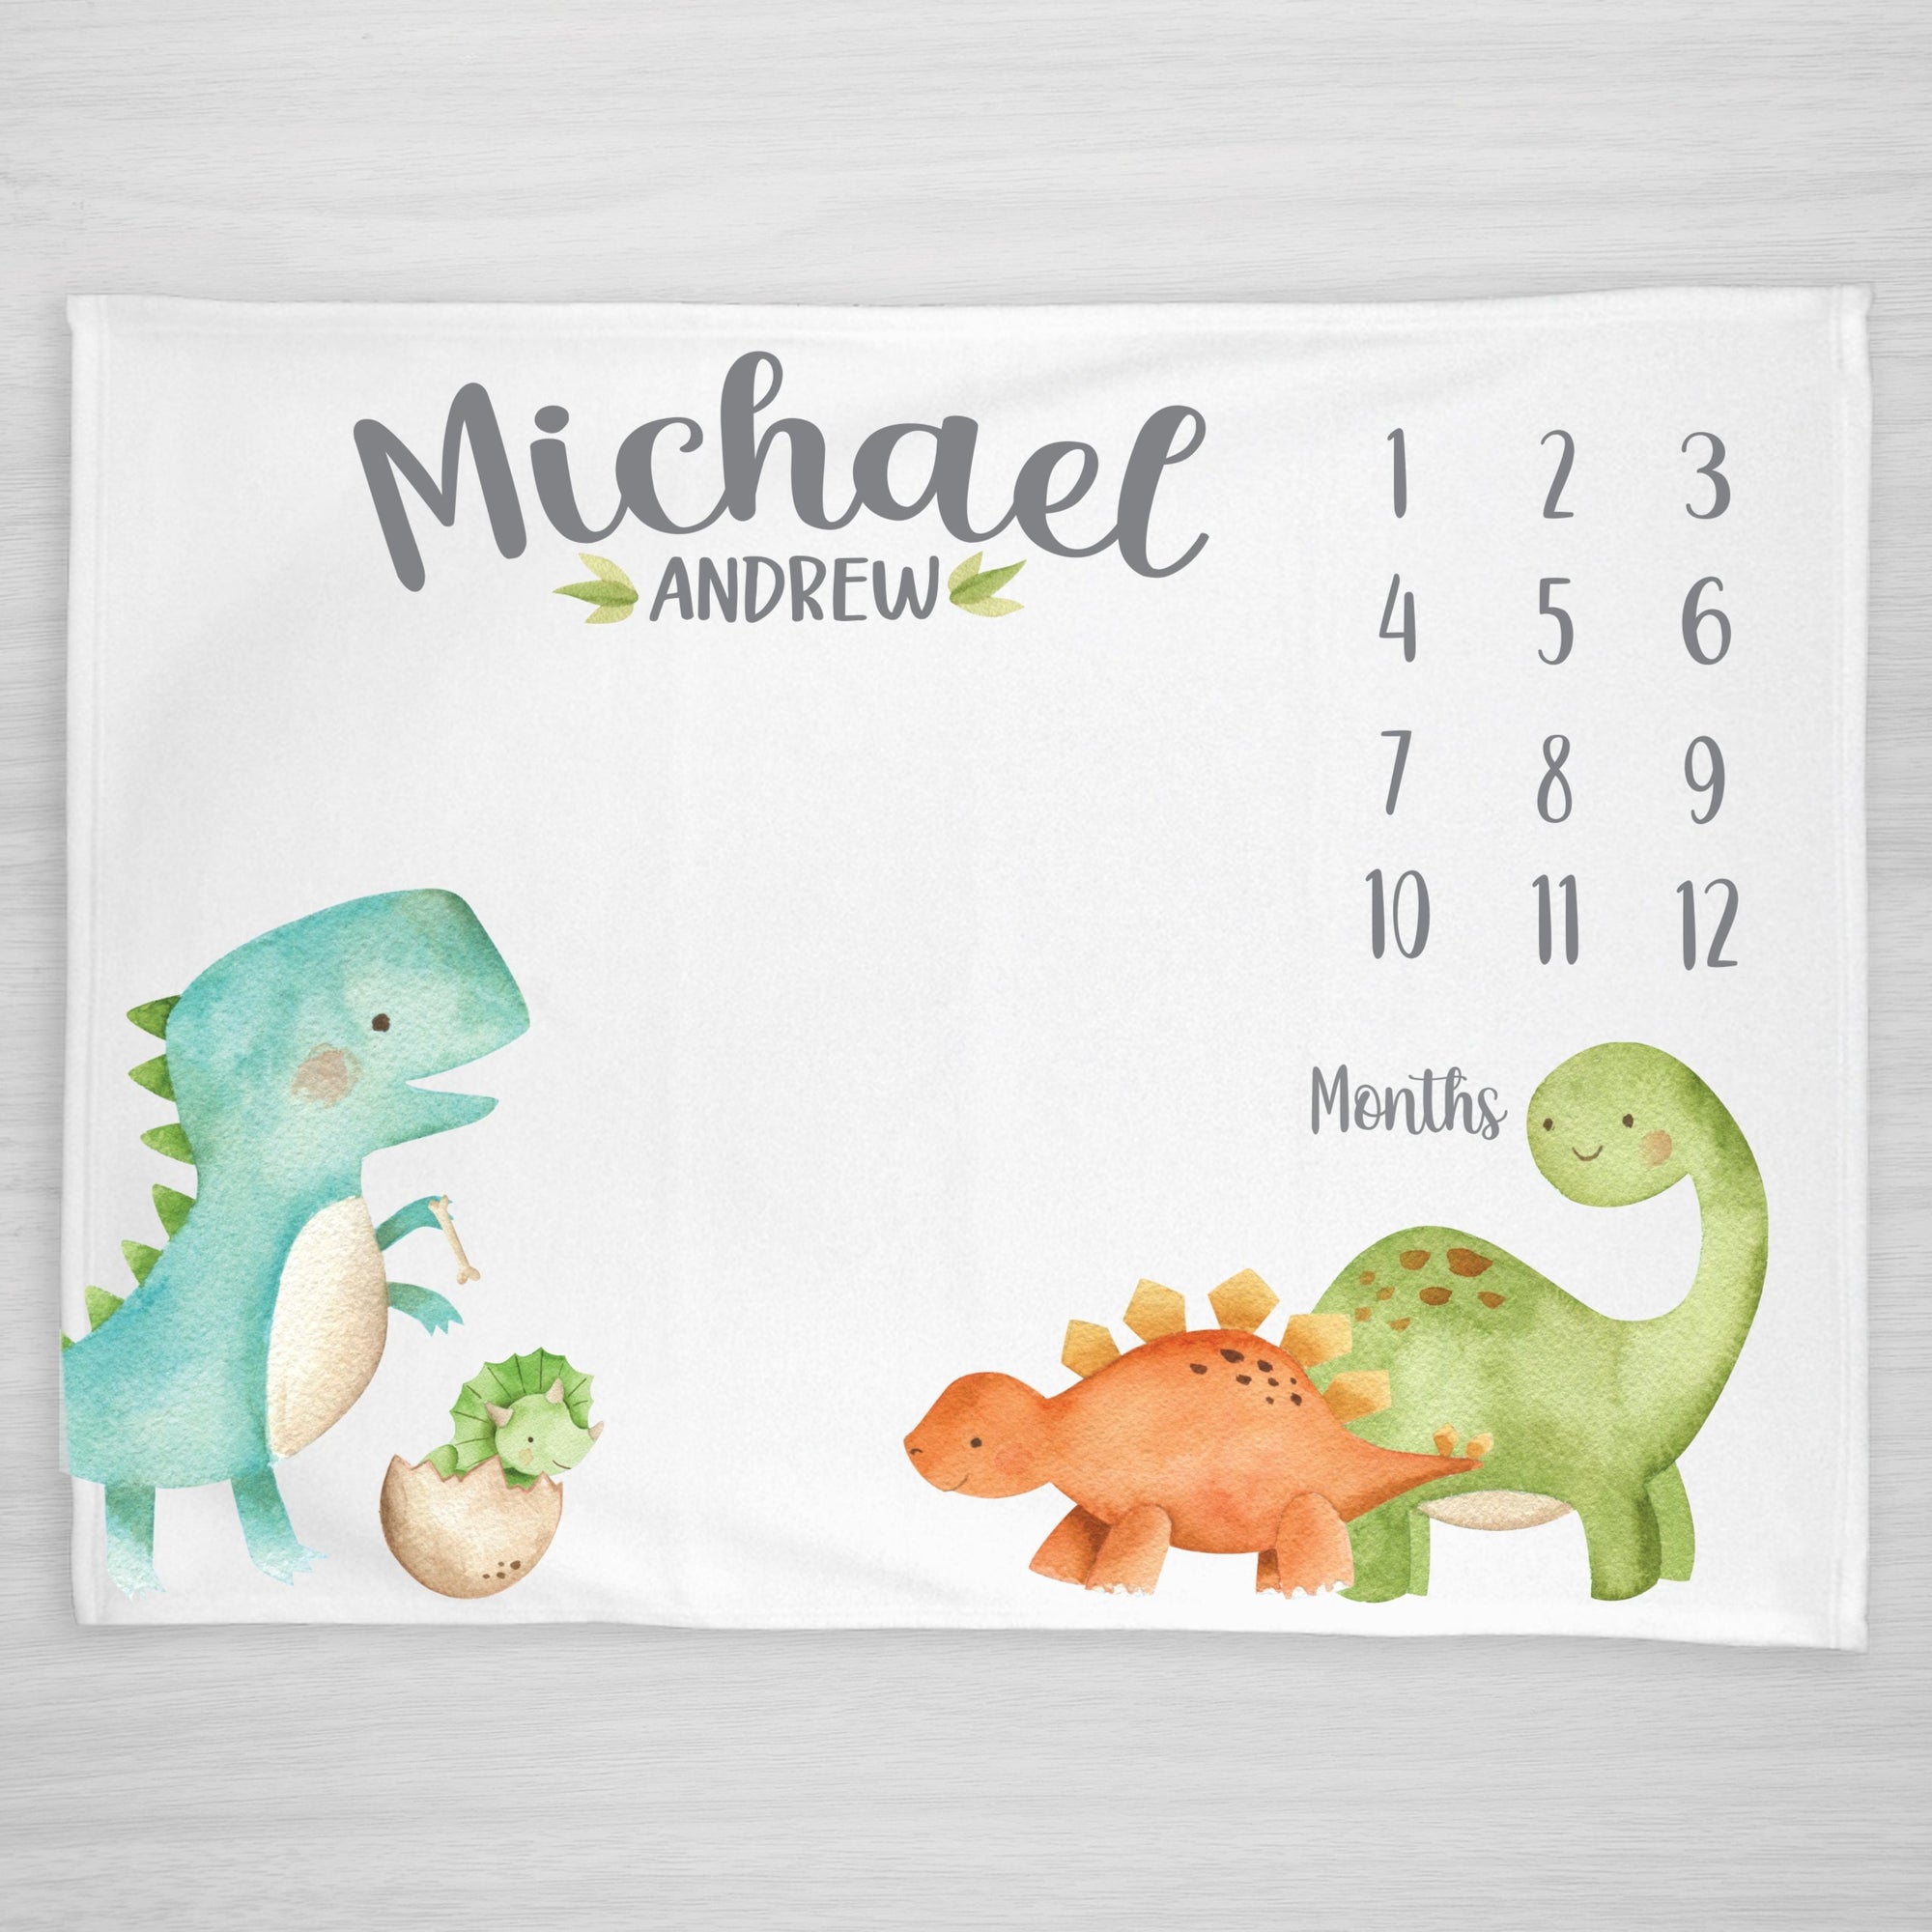 Dinosaur Personalized Milestone Baby Blanket, for boys or girls, featuring a trex, brontosaurus, stegosaurus, and triceratops, from Pipsy.com